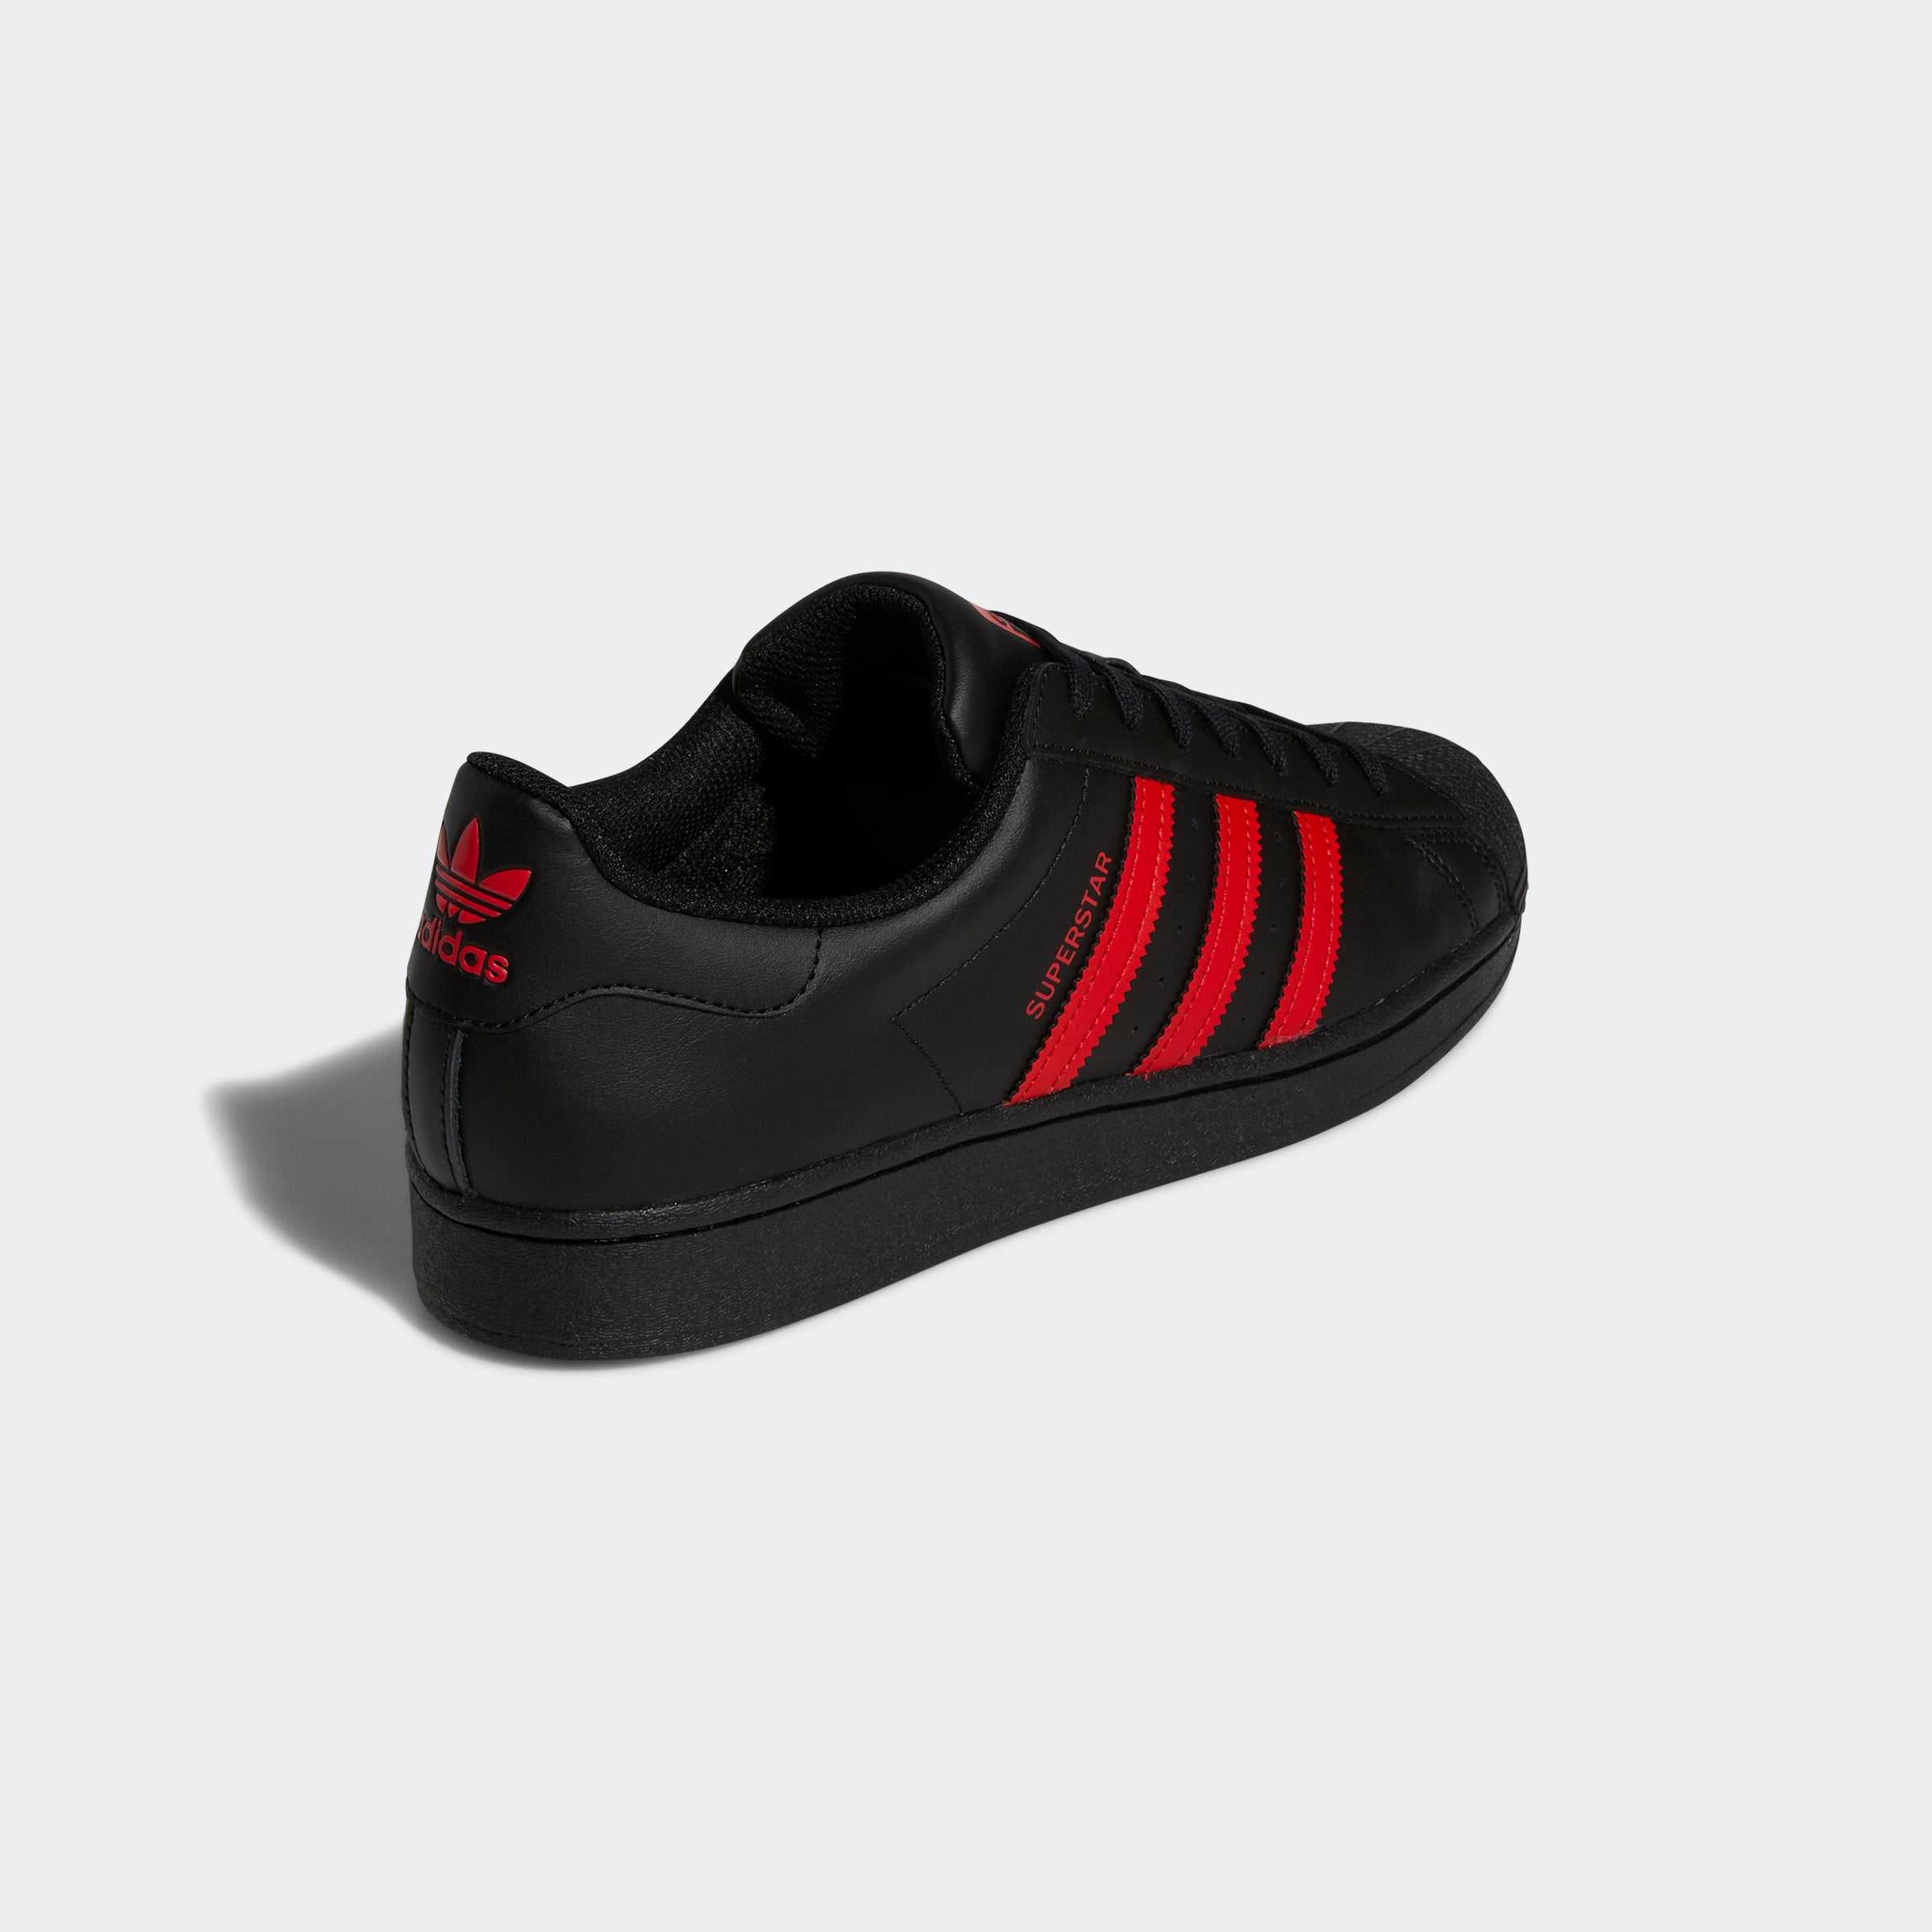 Red adidas Superstar Shoes, men lifestyle